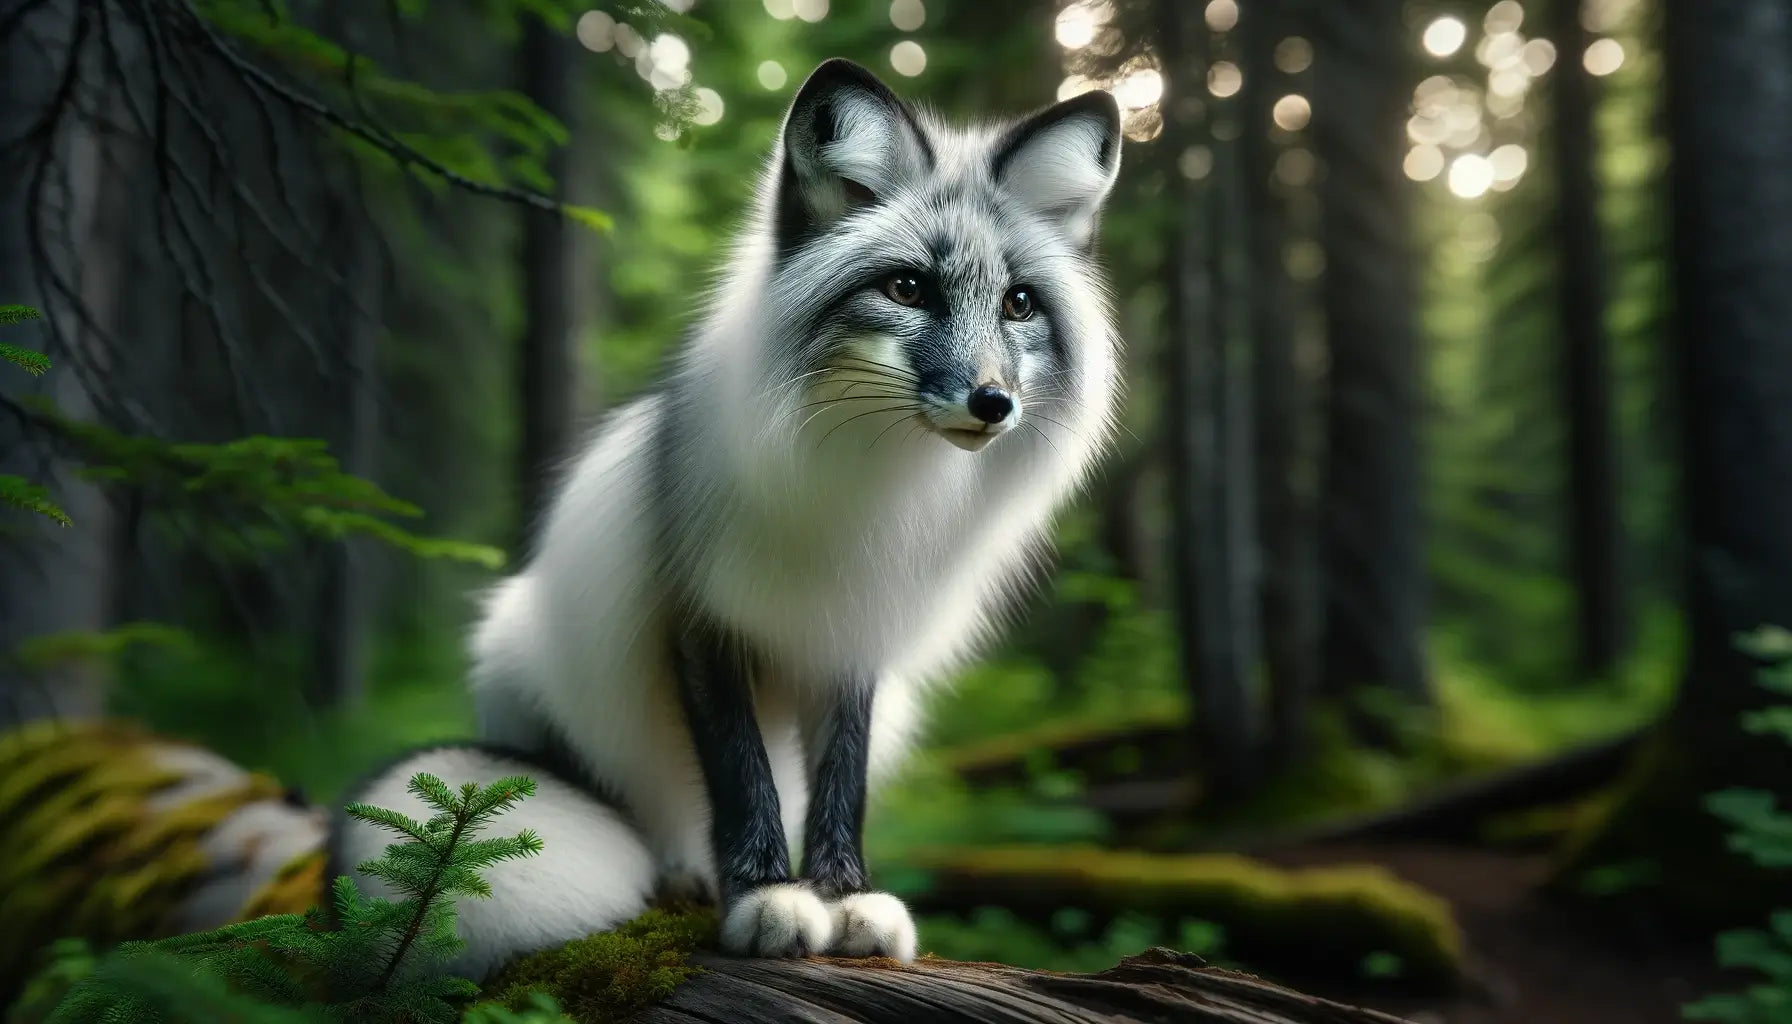 A Canadian Marble Fox with a predominantly white coat and subtle grey markings, attentively perched on a log in a lush forest setting.